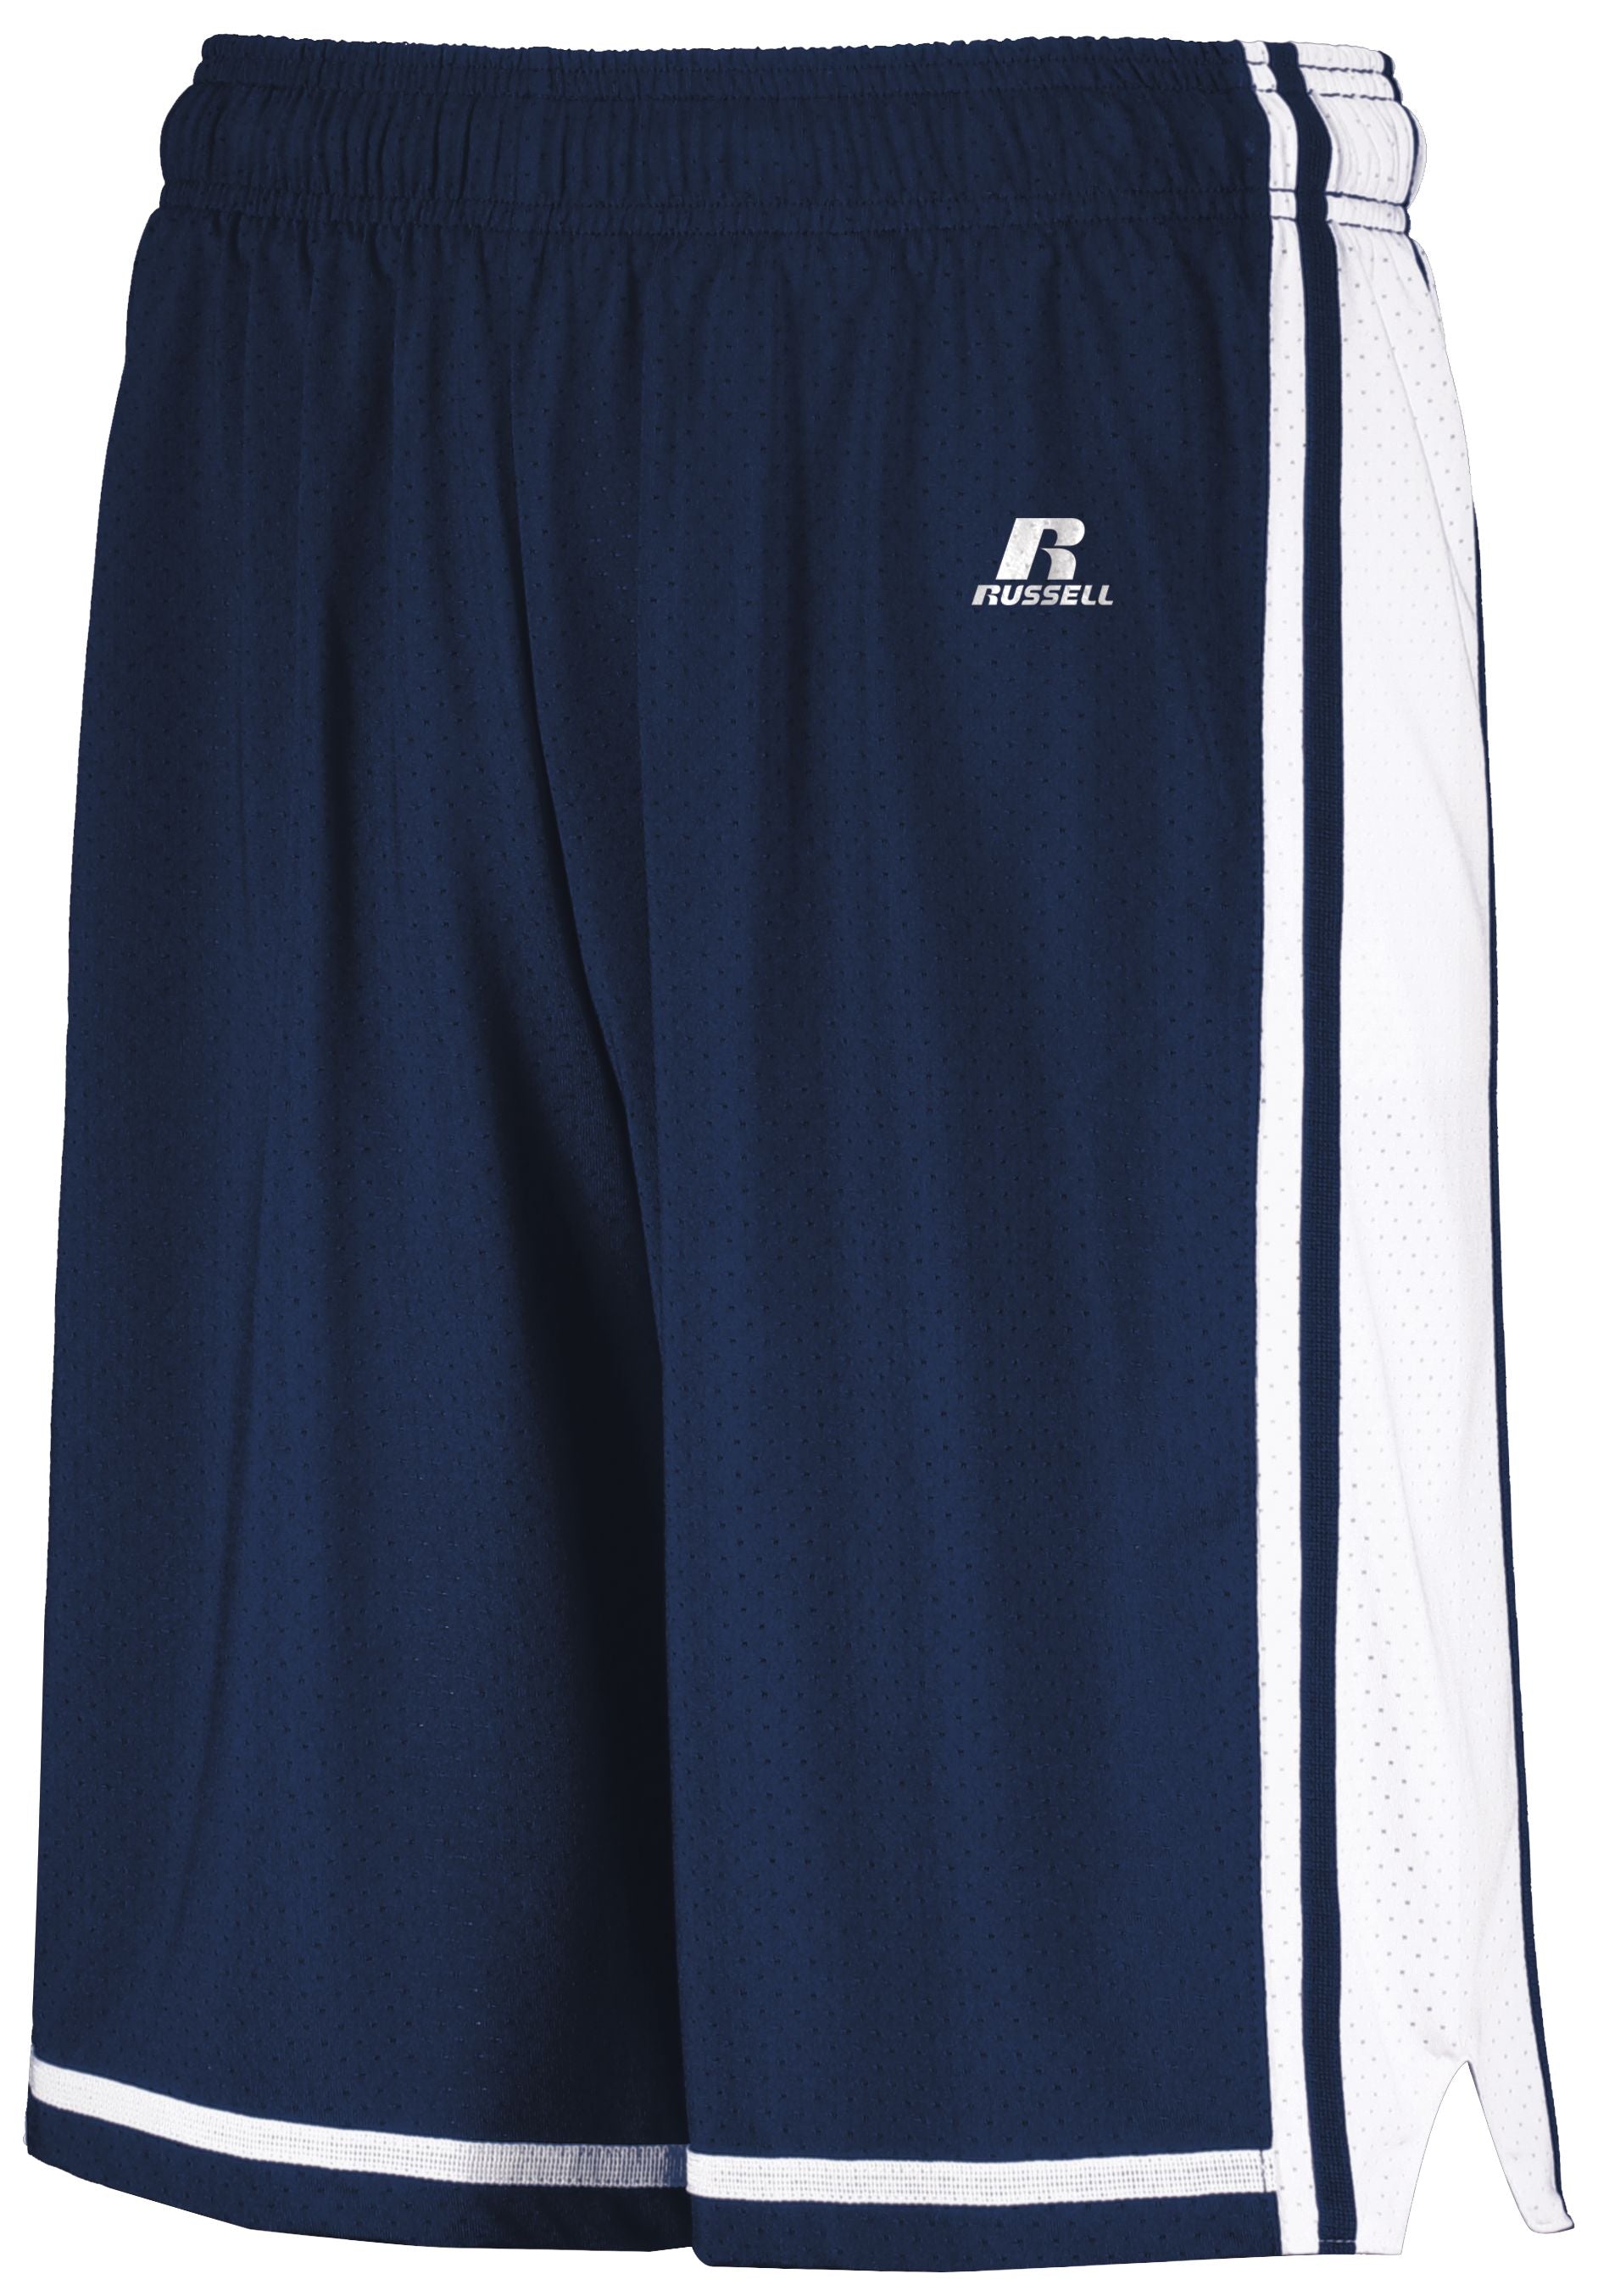 Russell Athletic Youth Legacy Basketball Shorts in Navy/White  -Part of the Youth, Youth-Shorts, Basketball, Russell-Athletic-Products, All-Sports, All-Sports-1 product lines at KanaleyCreations.com